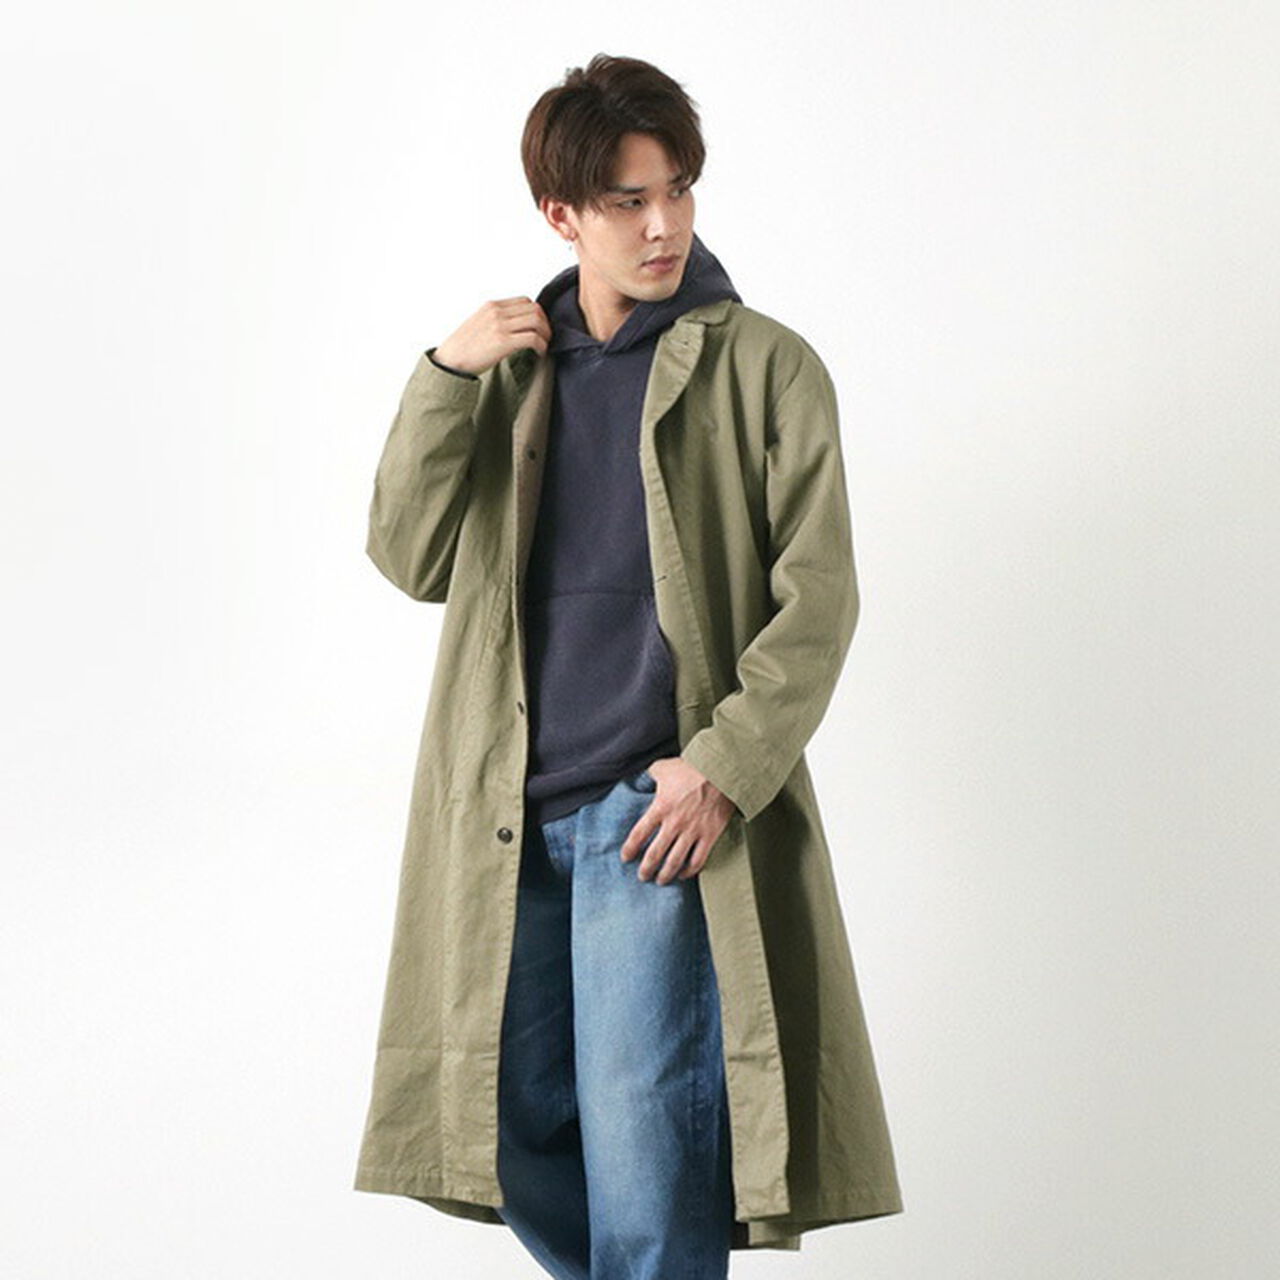 Chinocloth Overcoat,LightOlive, large image number 0